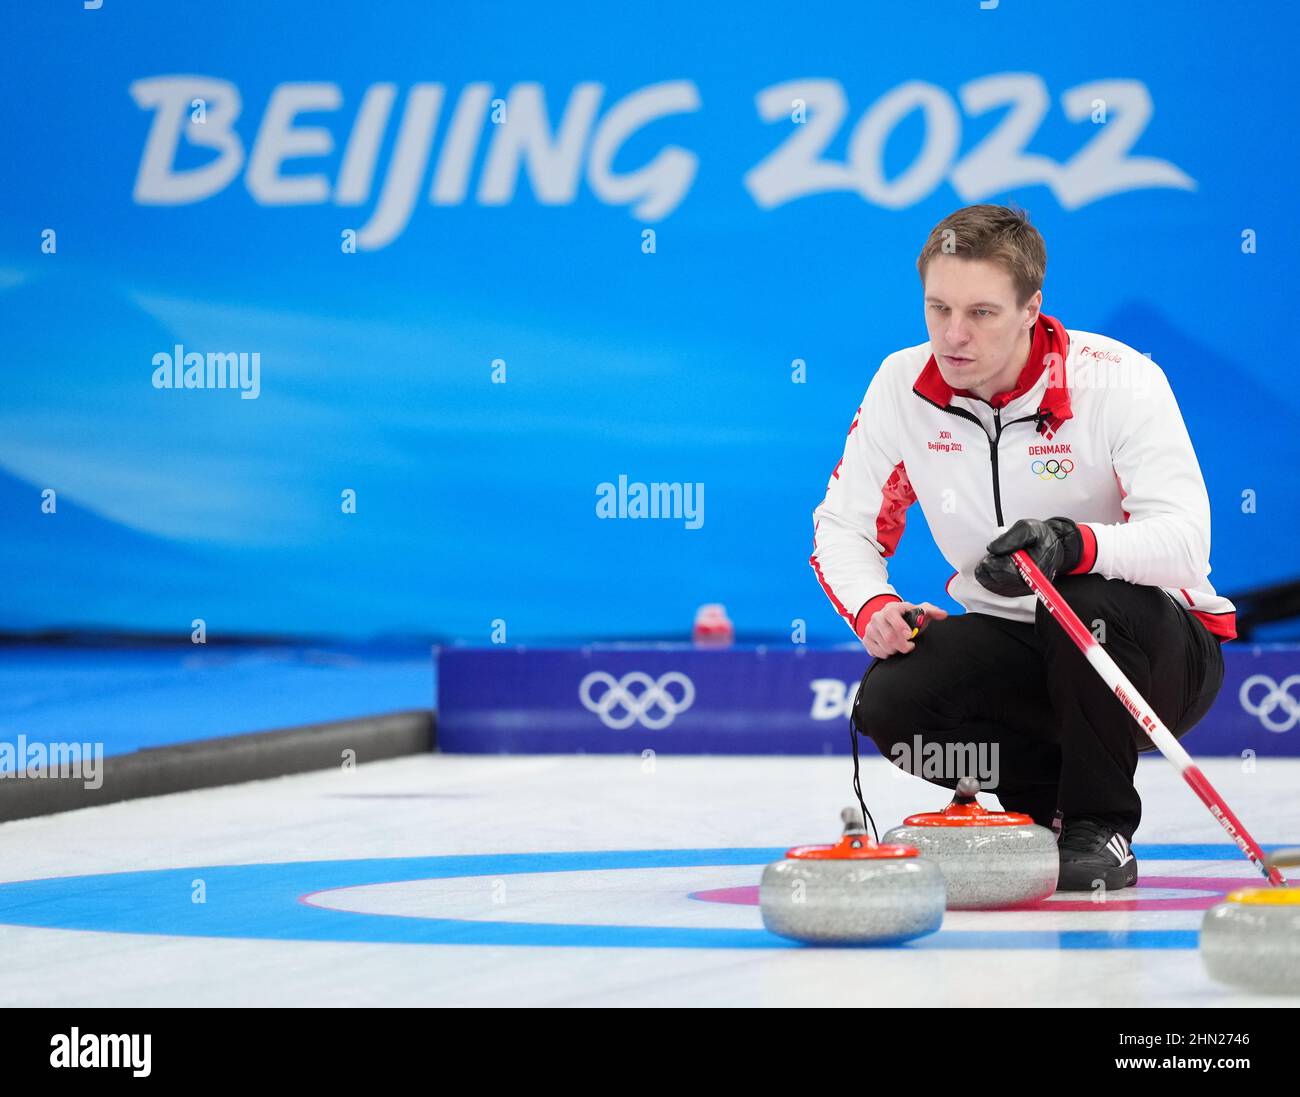 Beijing, China. 13th Feb, 2022. Mikkel Krause of Denmark competes during the curling men's round robin session 7 of the Beijing 2022 Winter Olympics between Britain and Denmark at the National Aquatics Centre in Beijing, capital of China, Feb. 13, 2022. Credit: Zhou Mi/Xinhua/Alamy Live News Stock Photo